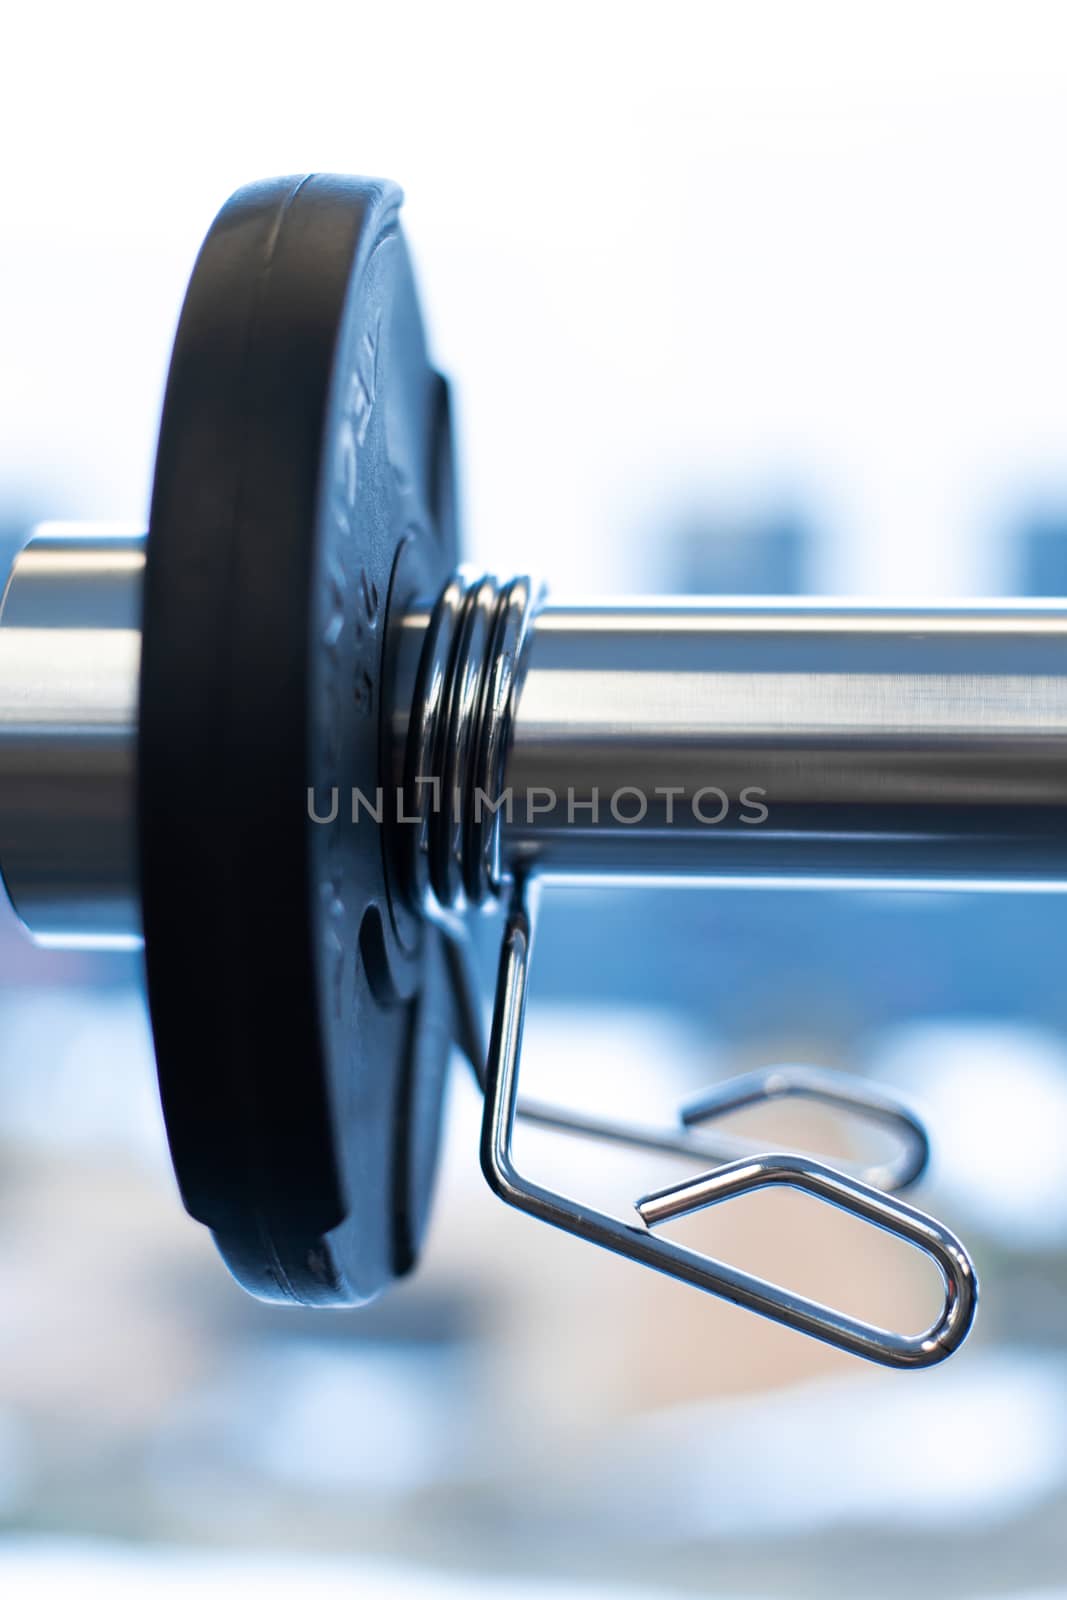 Closeup weight plate fixed on barbell in gym by Try_my_best